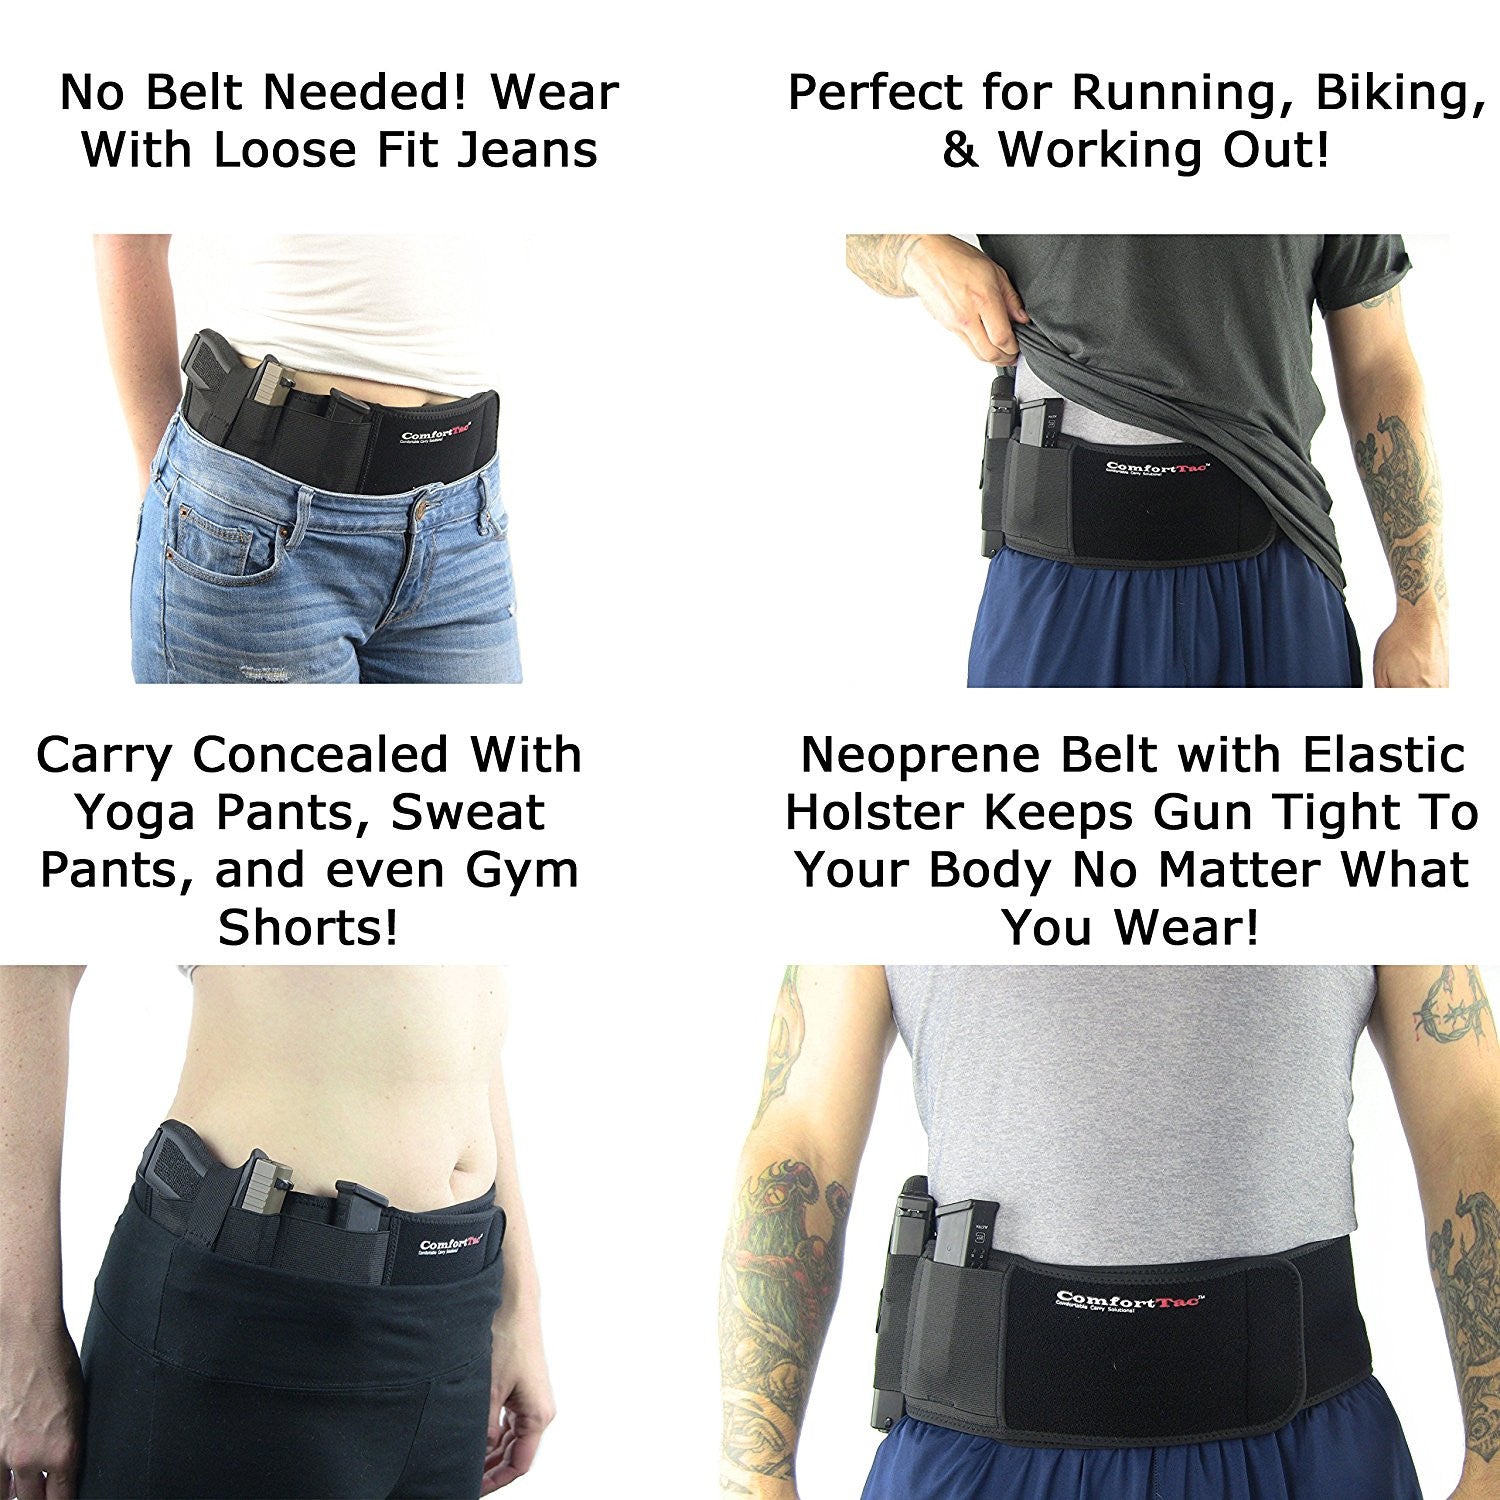 How Do I Know Which Belly Band Holster Suits Me Best?